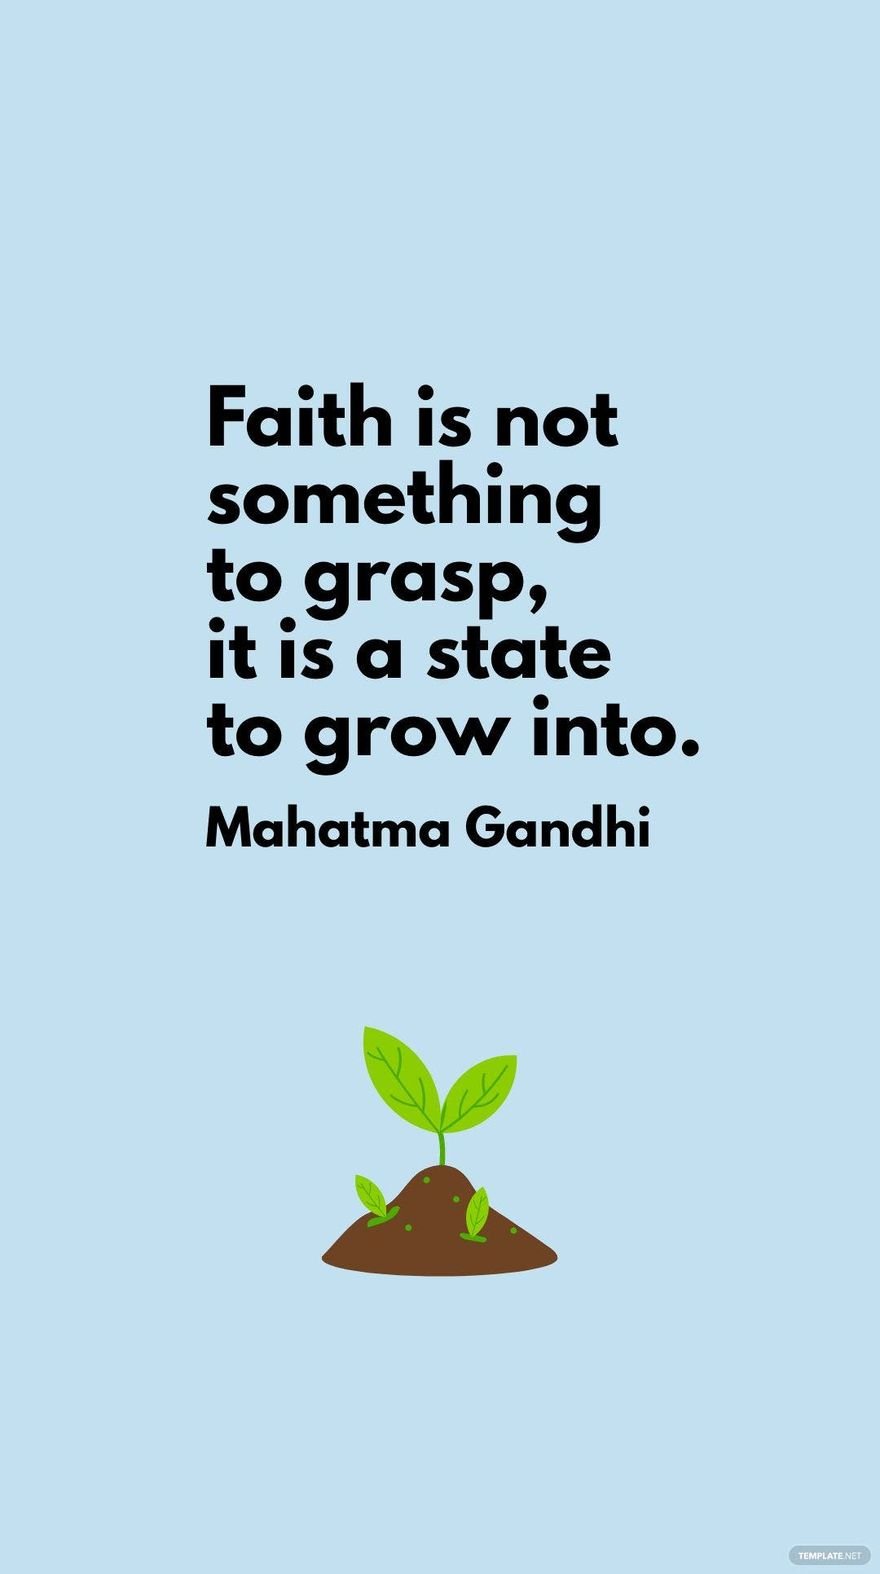 Free Mahatma Gandhi - Faith is not something to grasp, it is a state to grow into. in JPG